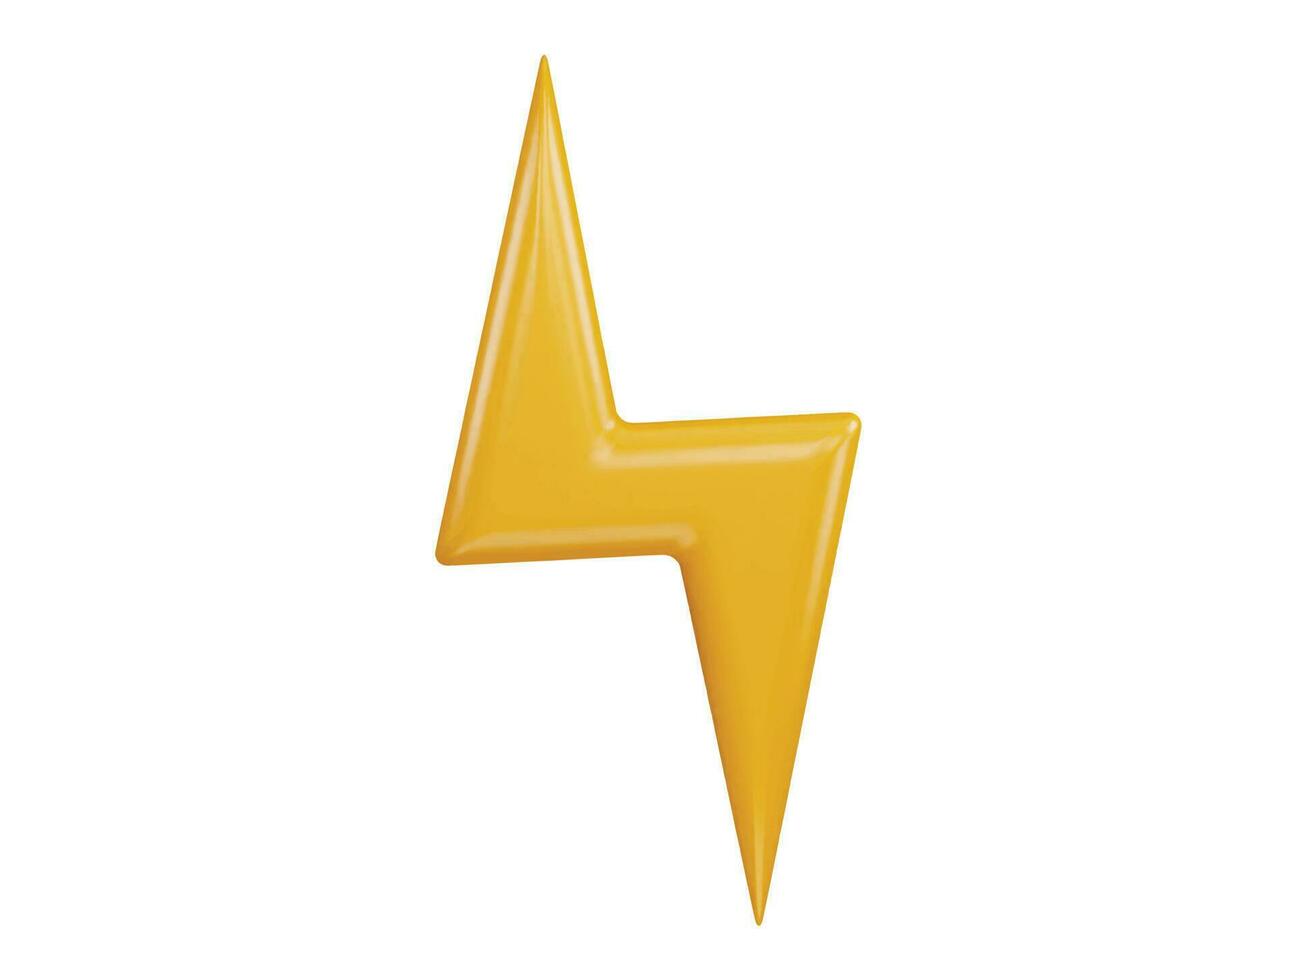 3d rendering Electricity 3d vector icon illustration